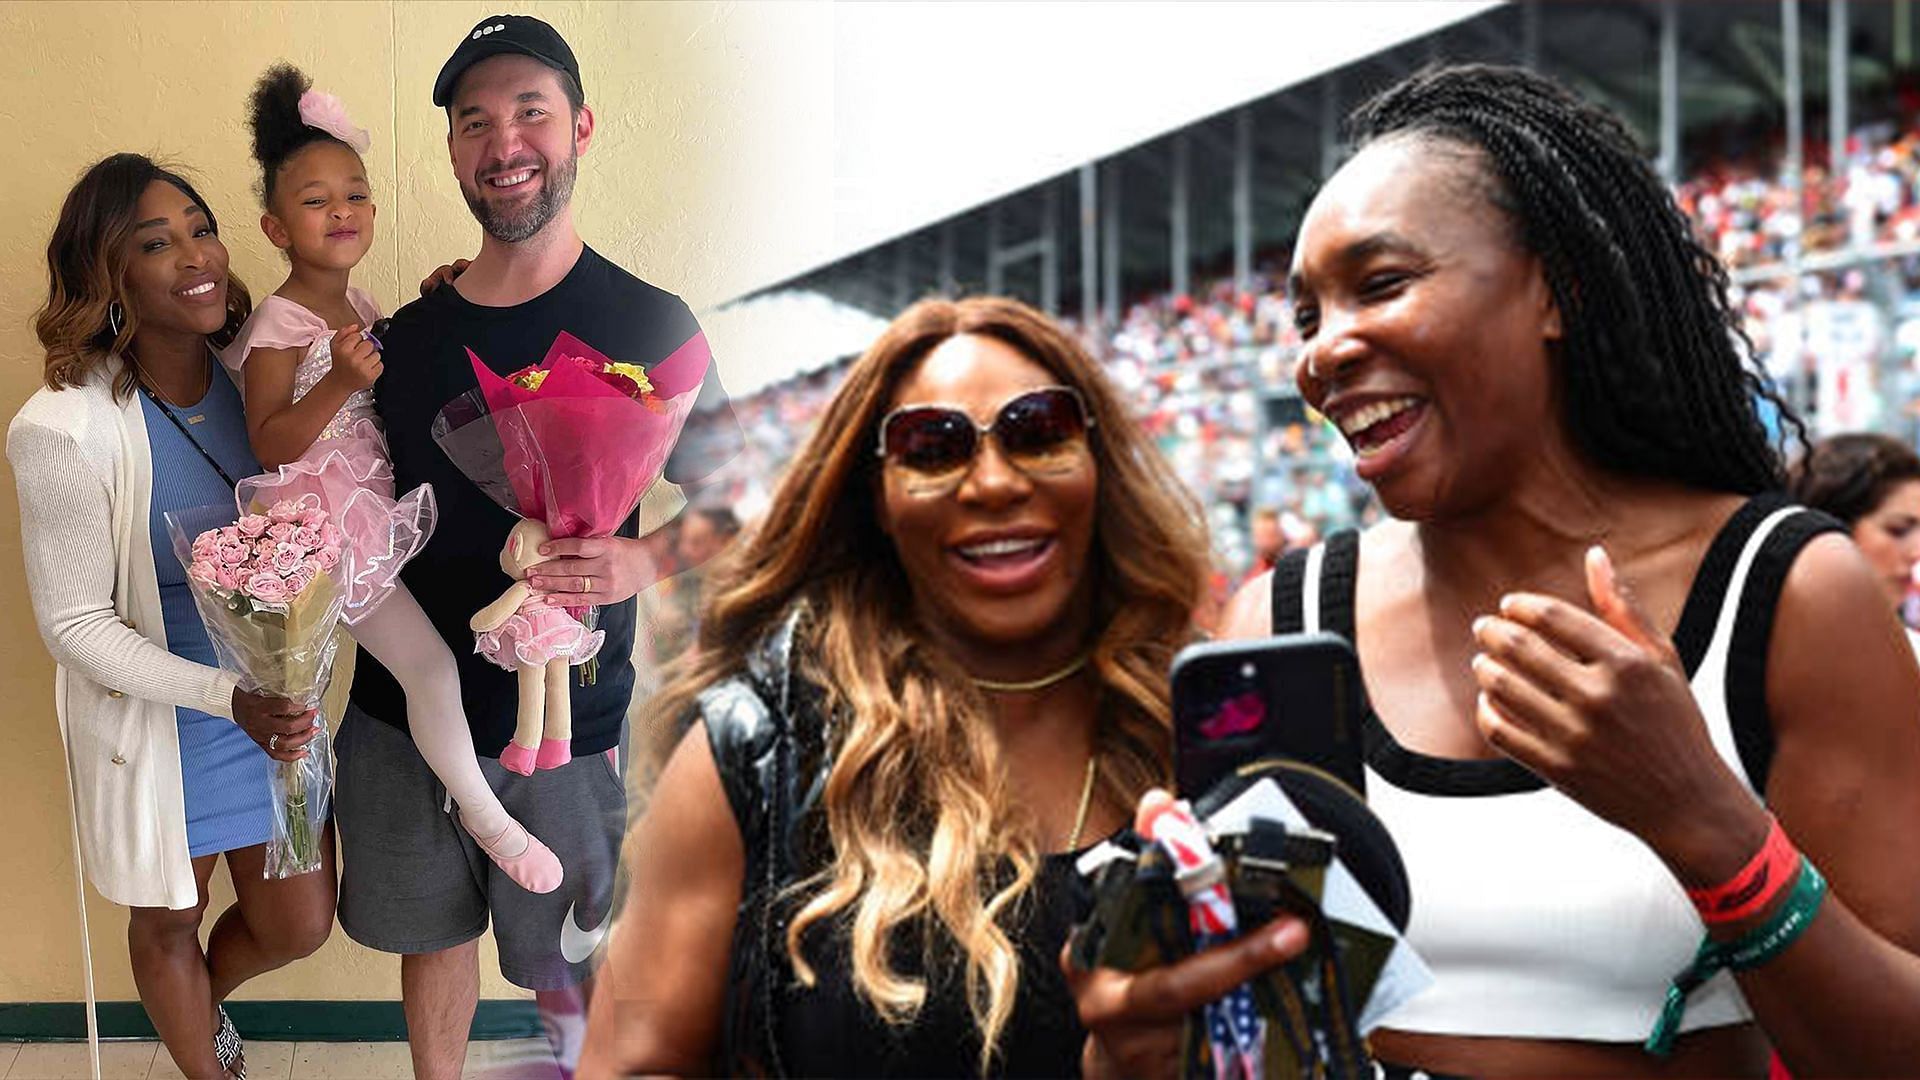 Serena Williams is expecting a baby girl as her 2nd child